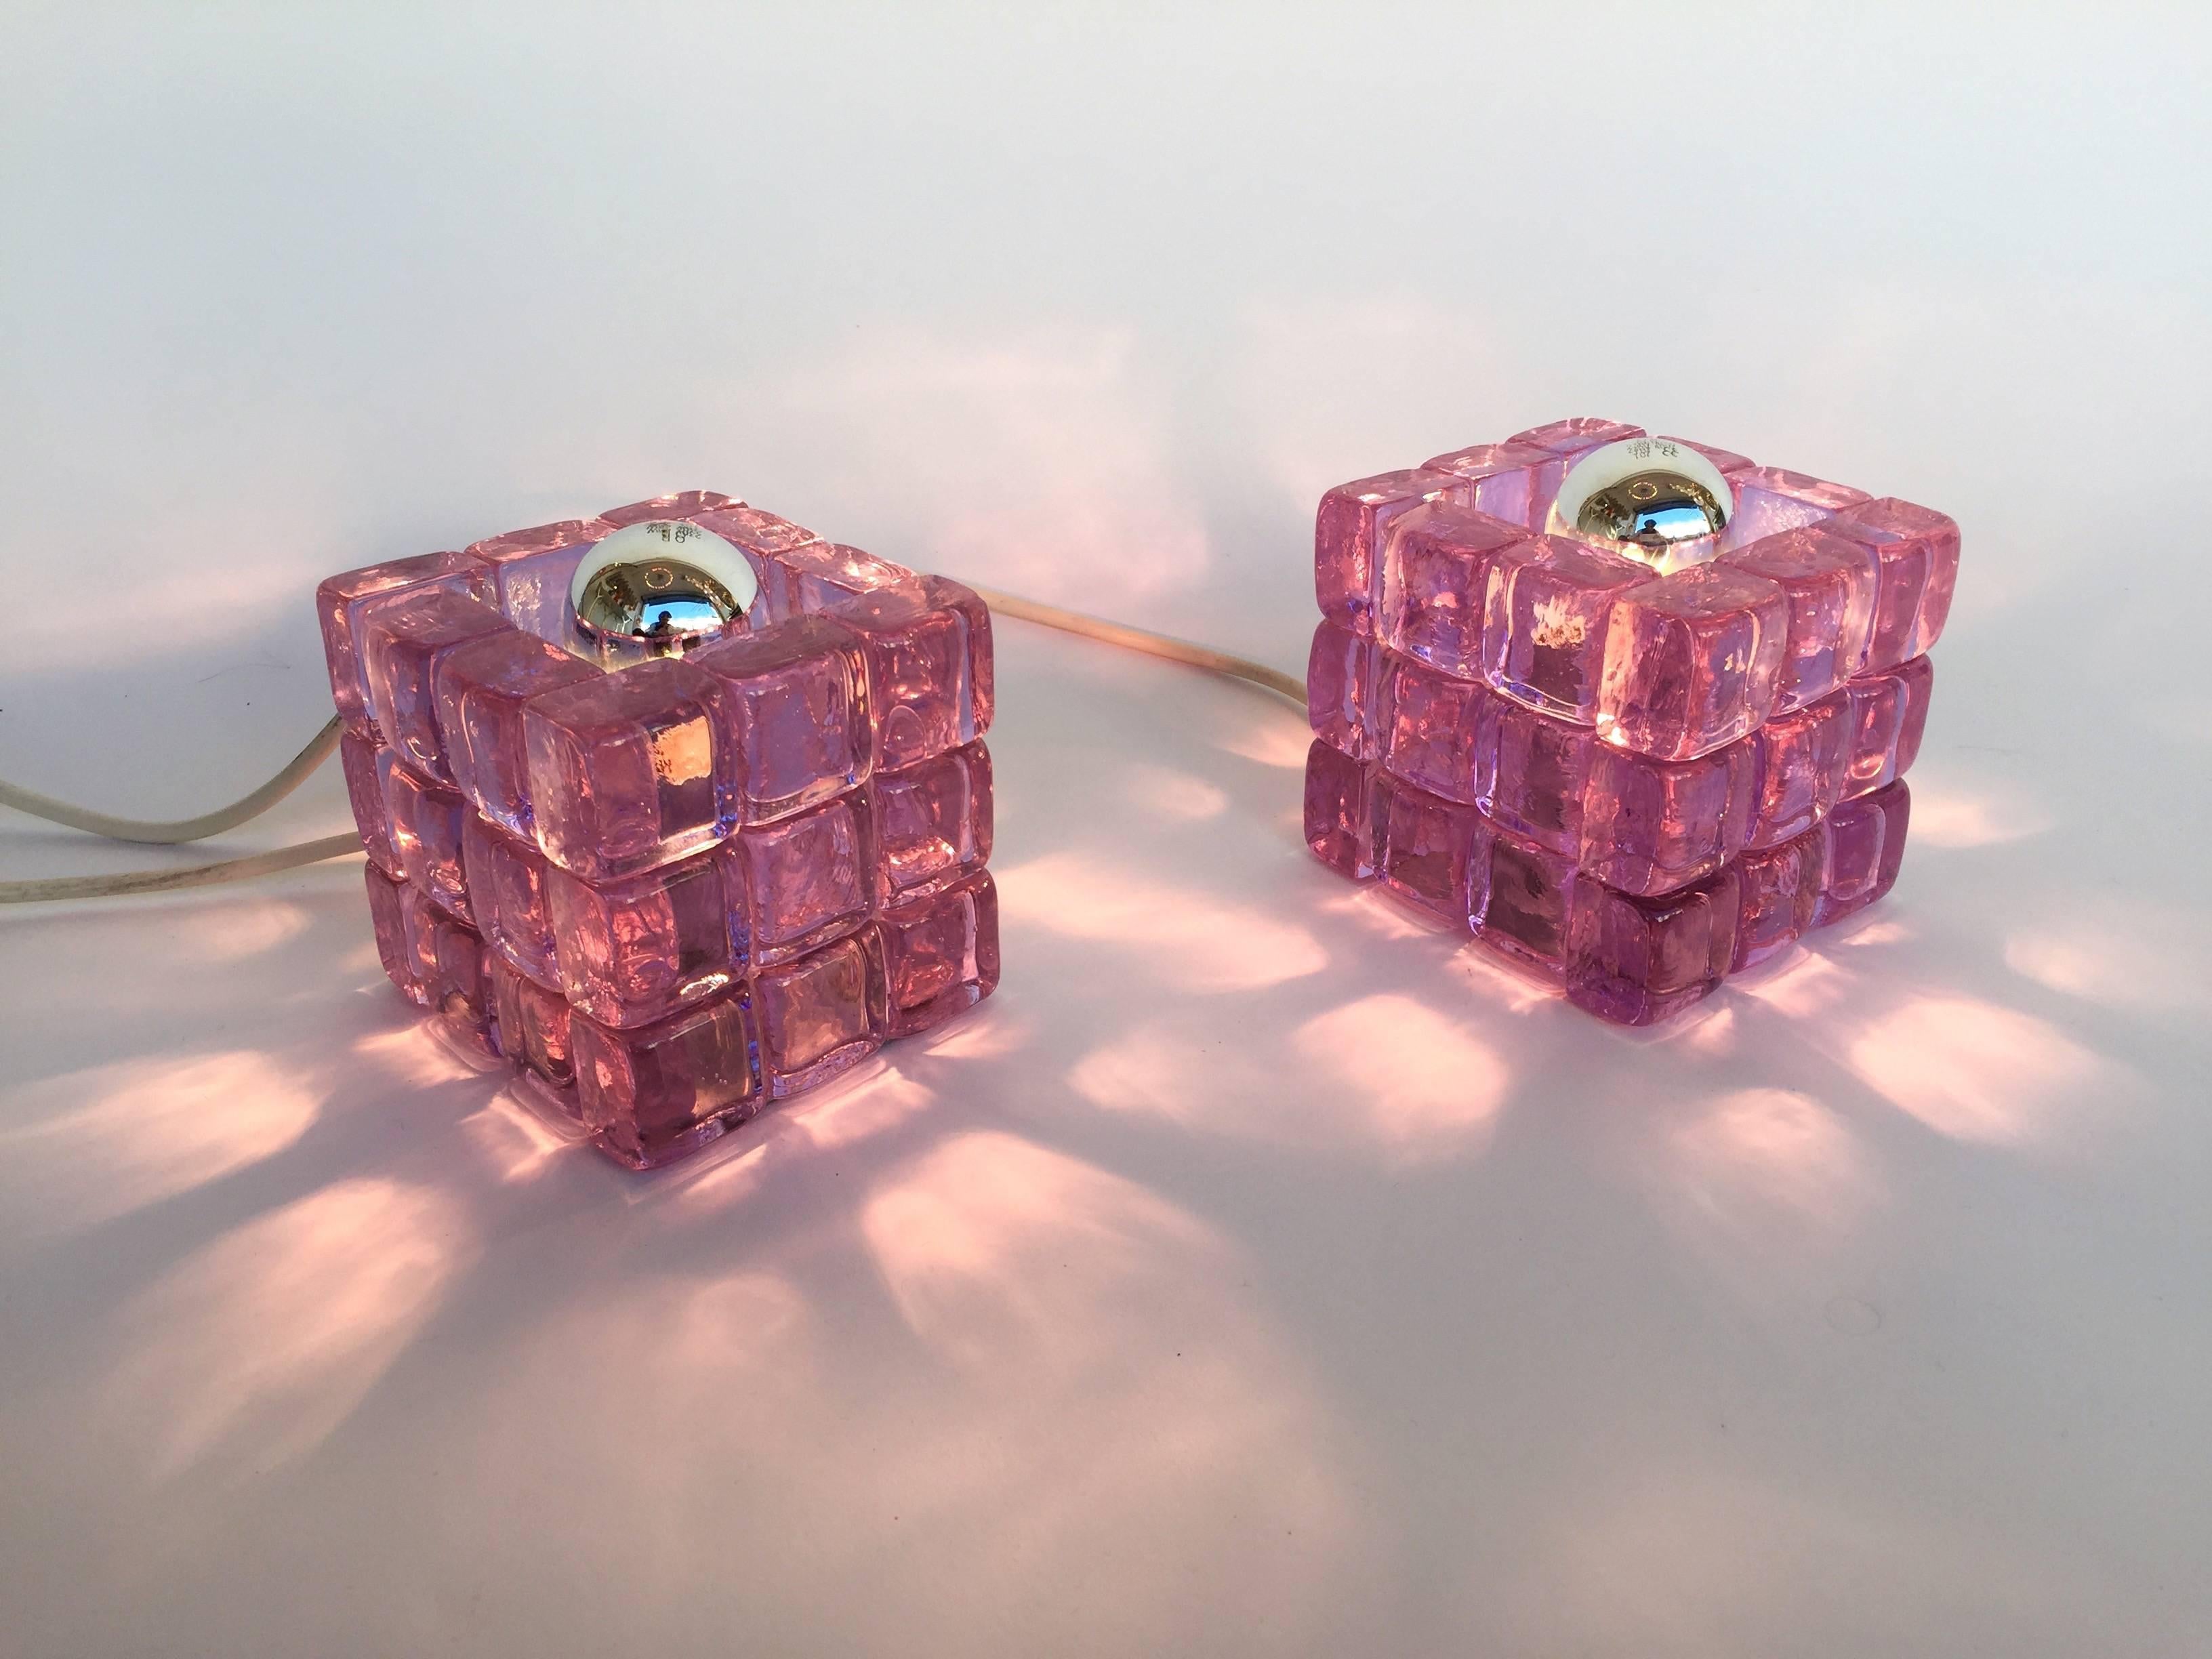 Interesting pair of table or bedside cube lamps by Albano Poli for the manufacture Poliarte in Verona. rare in this Parma purple color glass. Its a famous manufacture like Mazzega Murano, Carlo Nason, Venini, Vistosi, VeArt, La Murinna, Artemide in